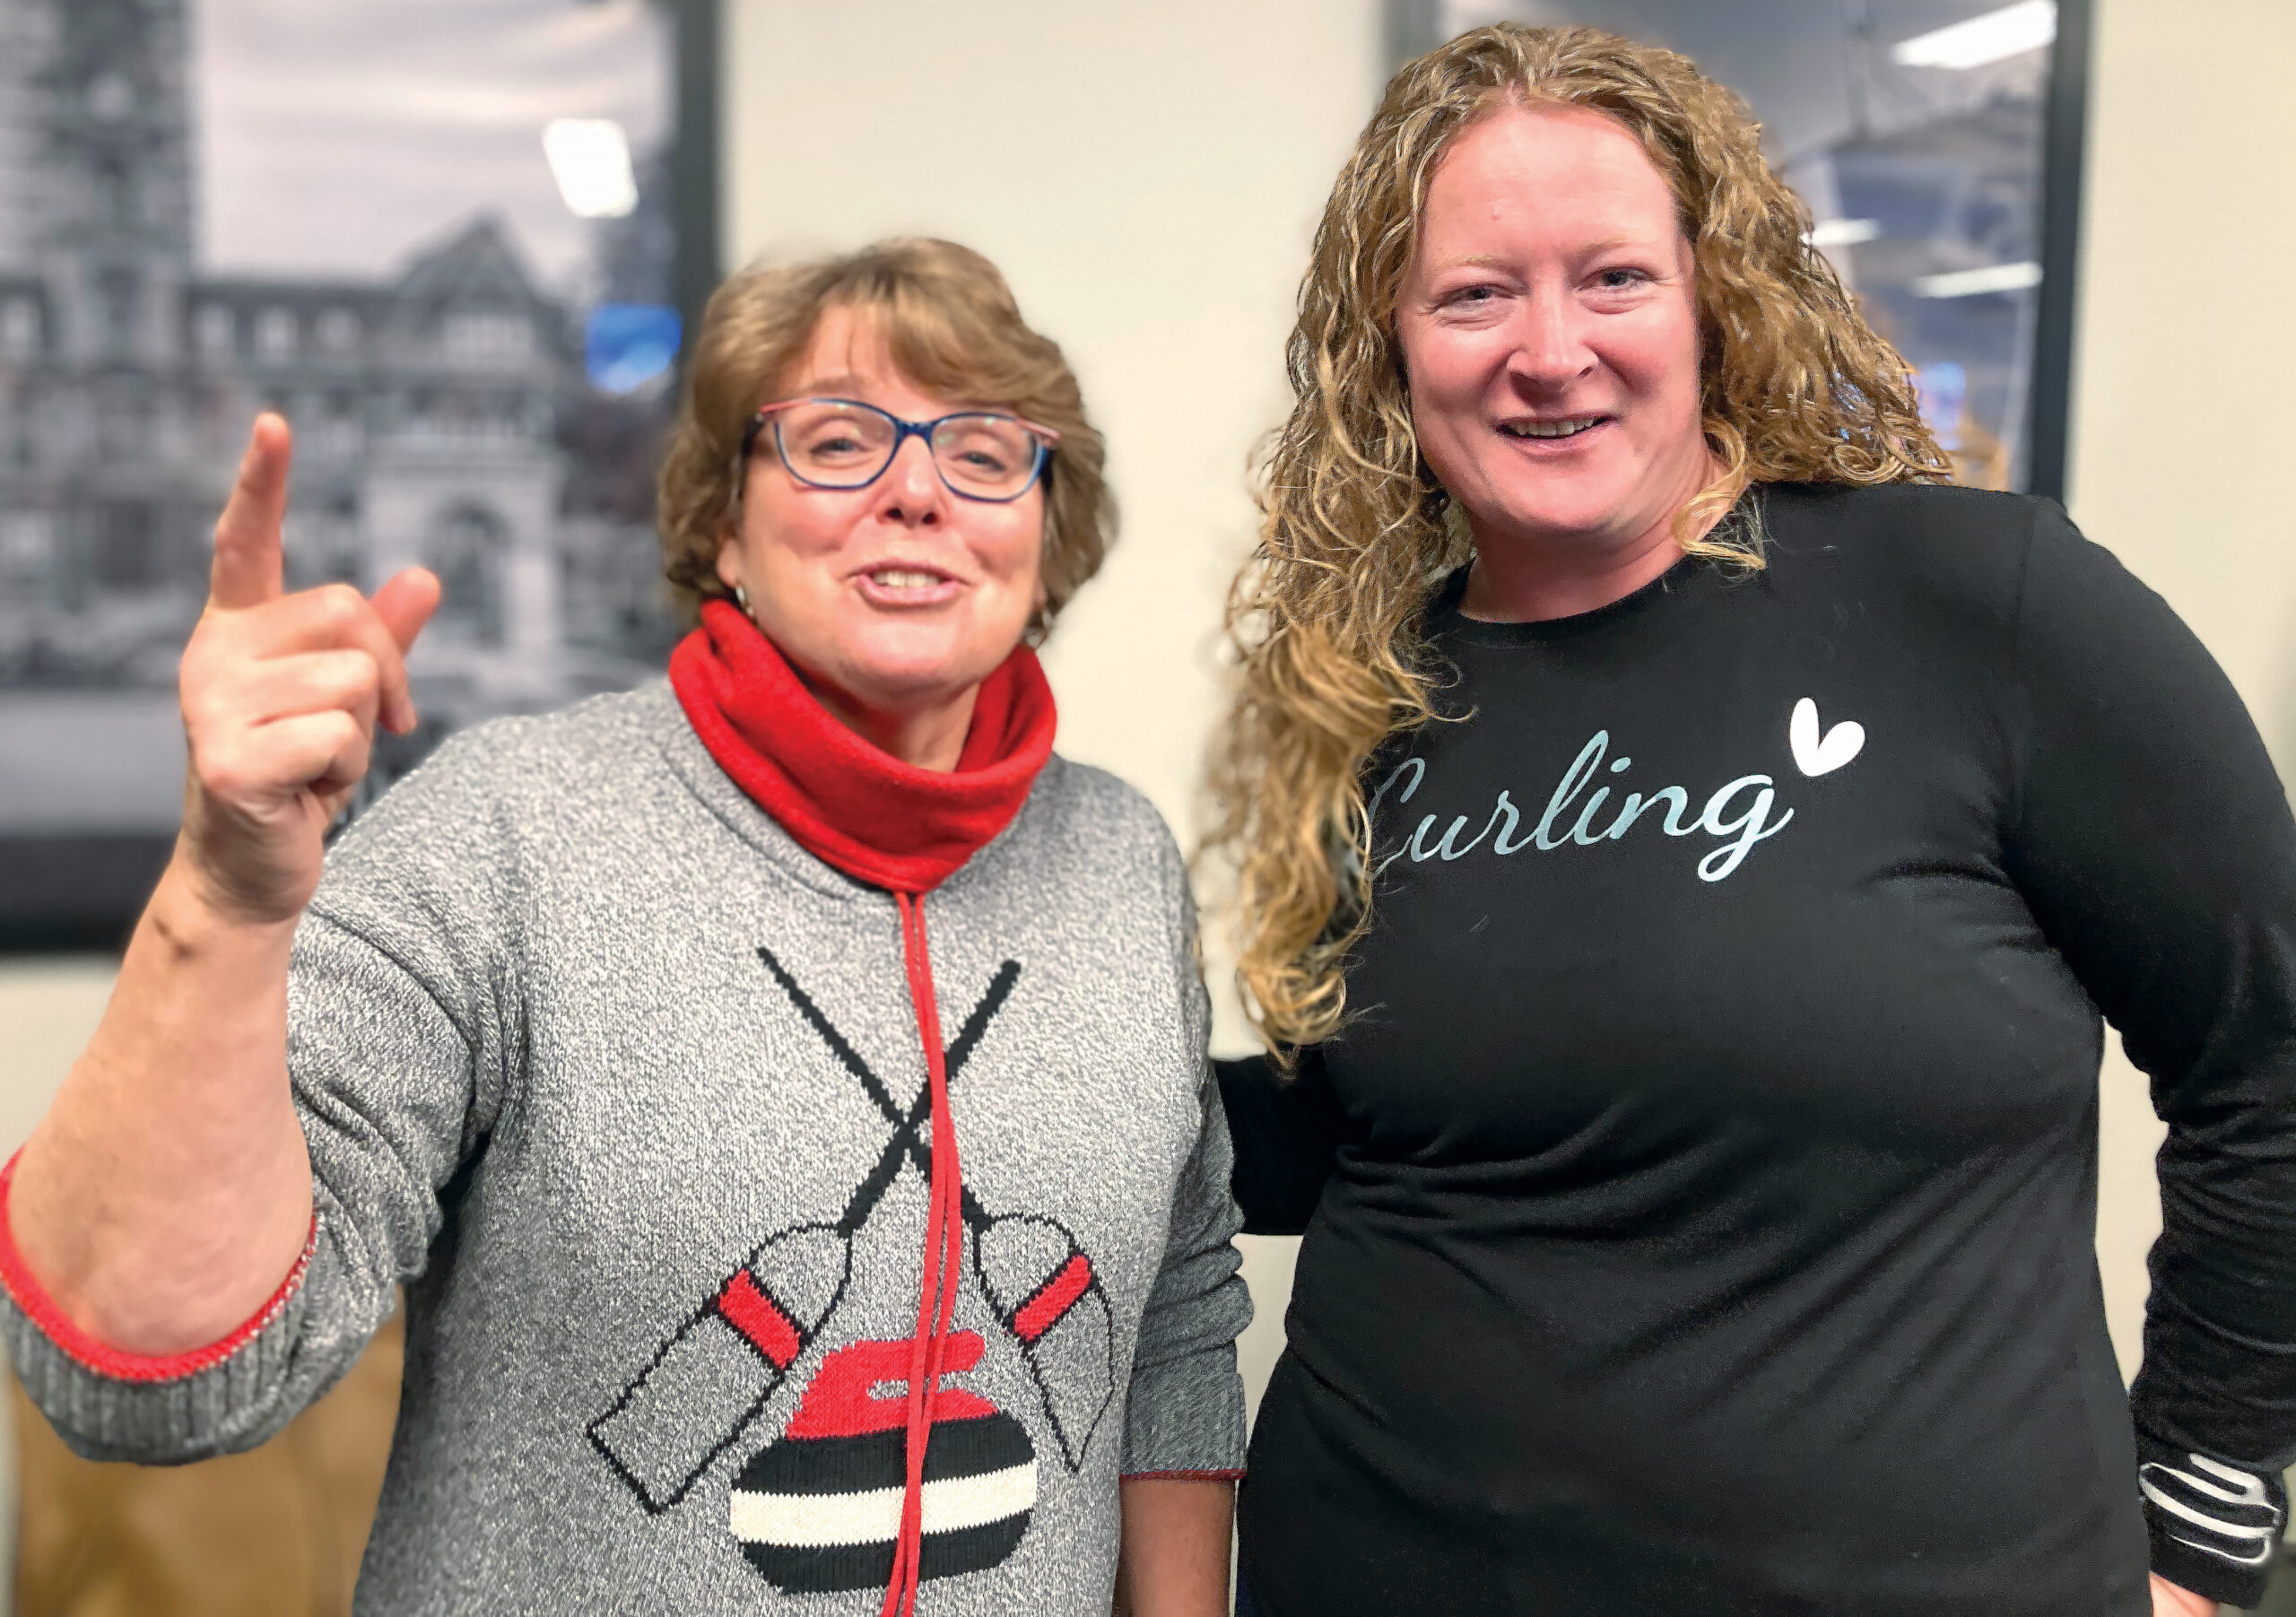 Two women wearing Curling themed sweater smiling for the camera